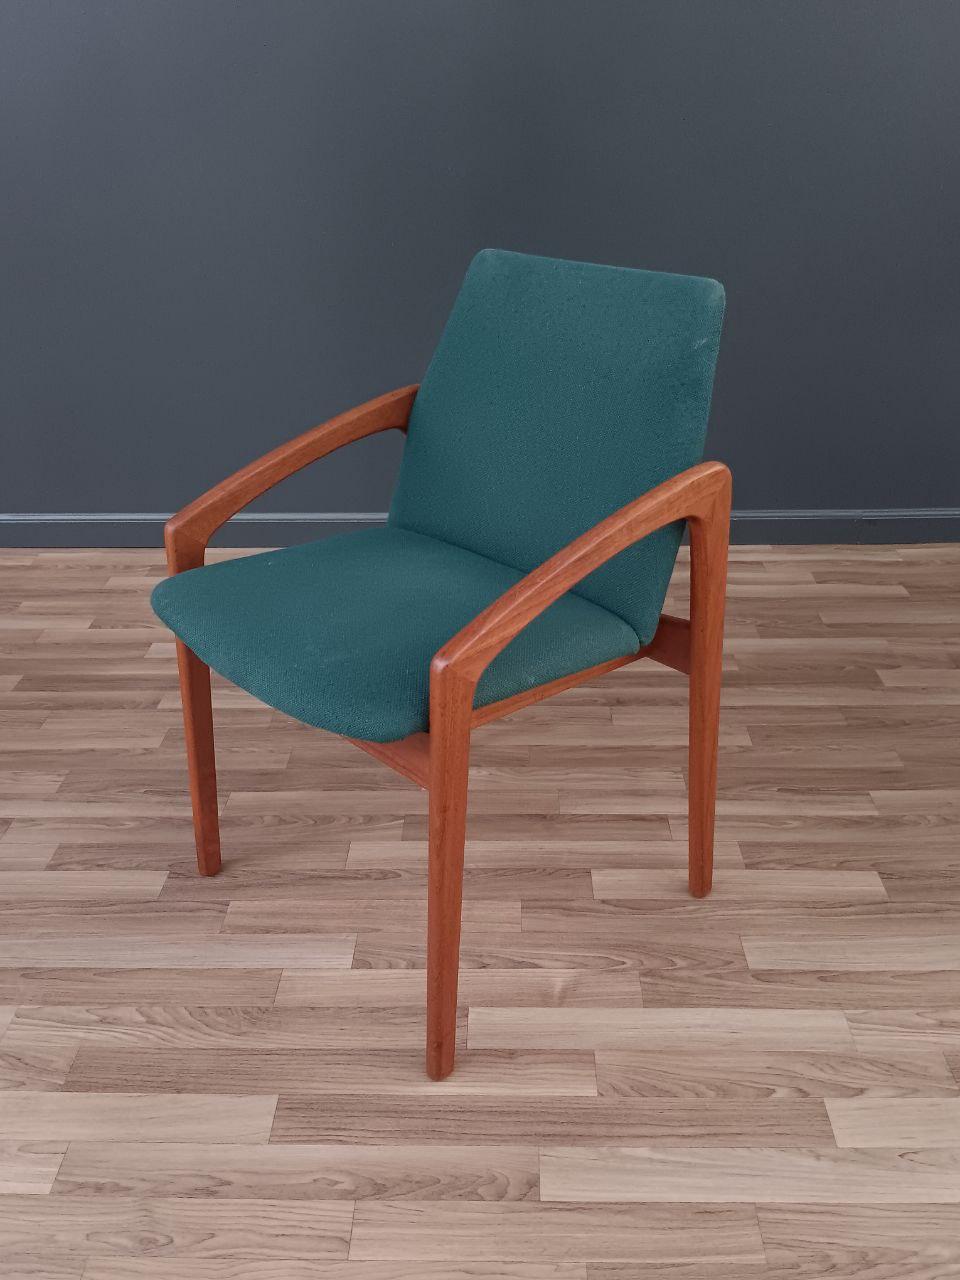 Set of 4 Mid-Century Danish Modern Dining Chairs by Kai Kristiansen For Sale 1